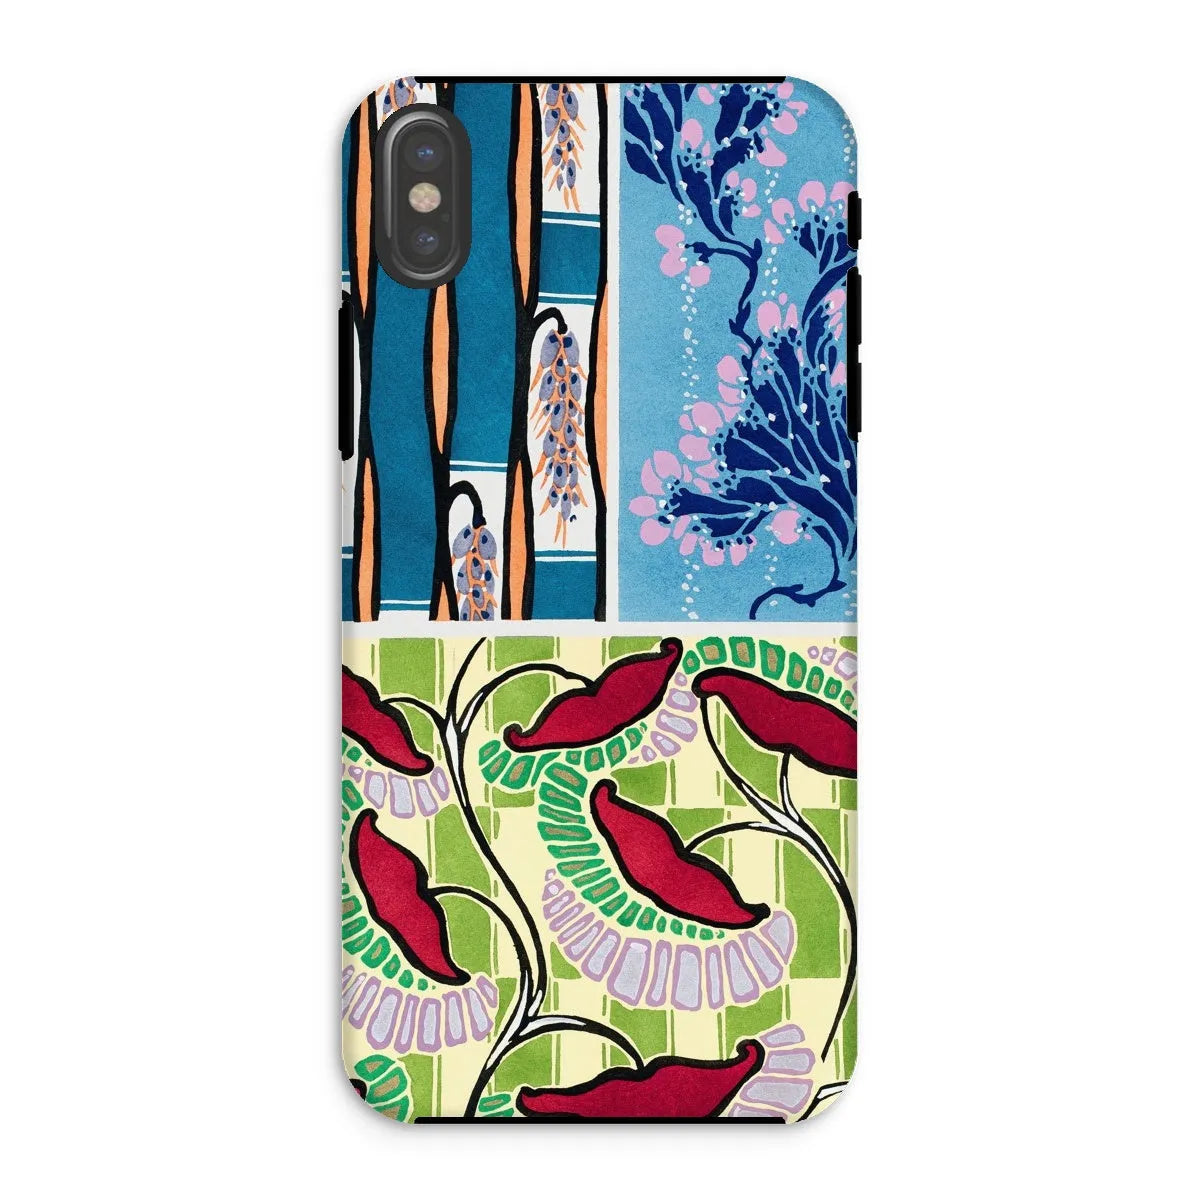 Floral Kitsch Aesthetic Art Phone Case - E.a. Séguy - Iphone Xs / Matte - Mobile Phone Cases - Aesthetic Art